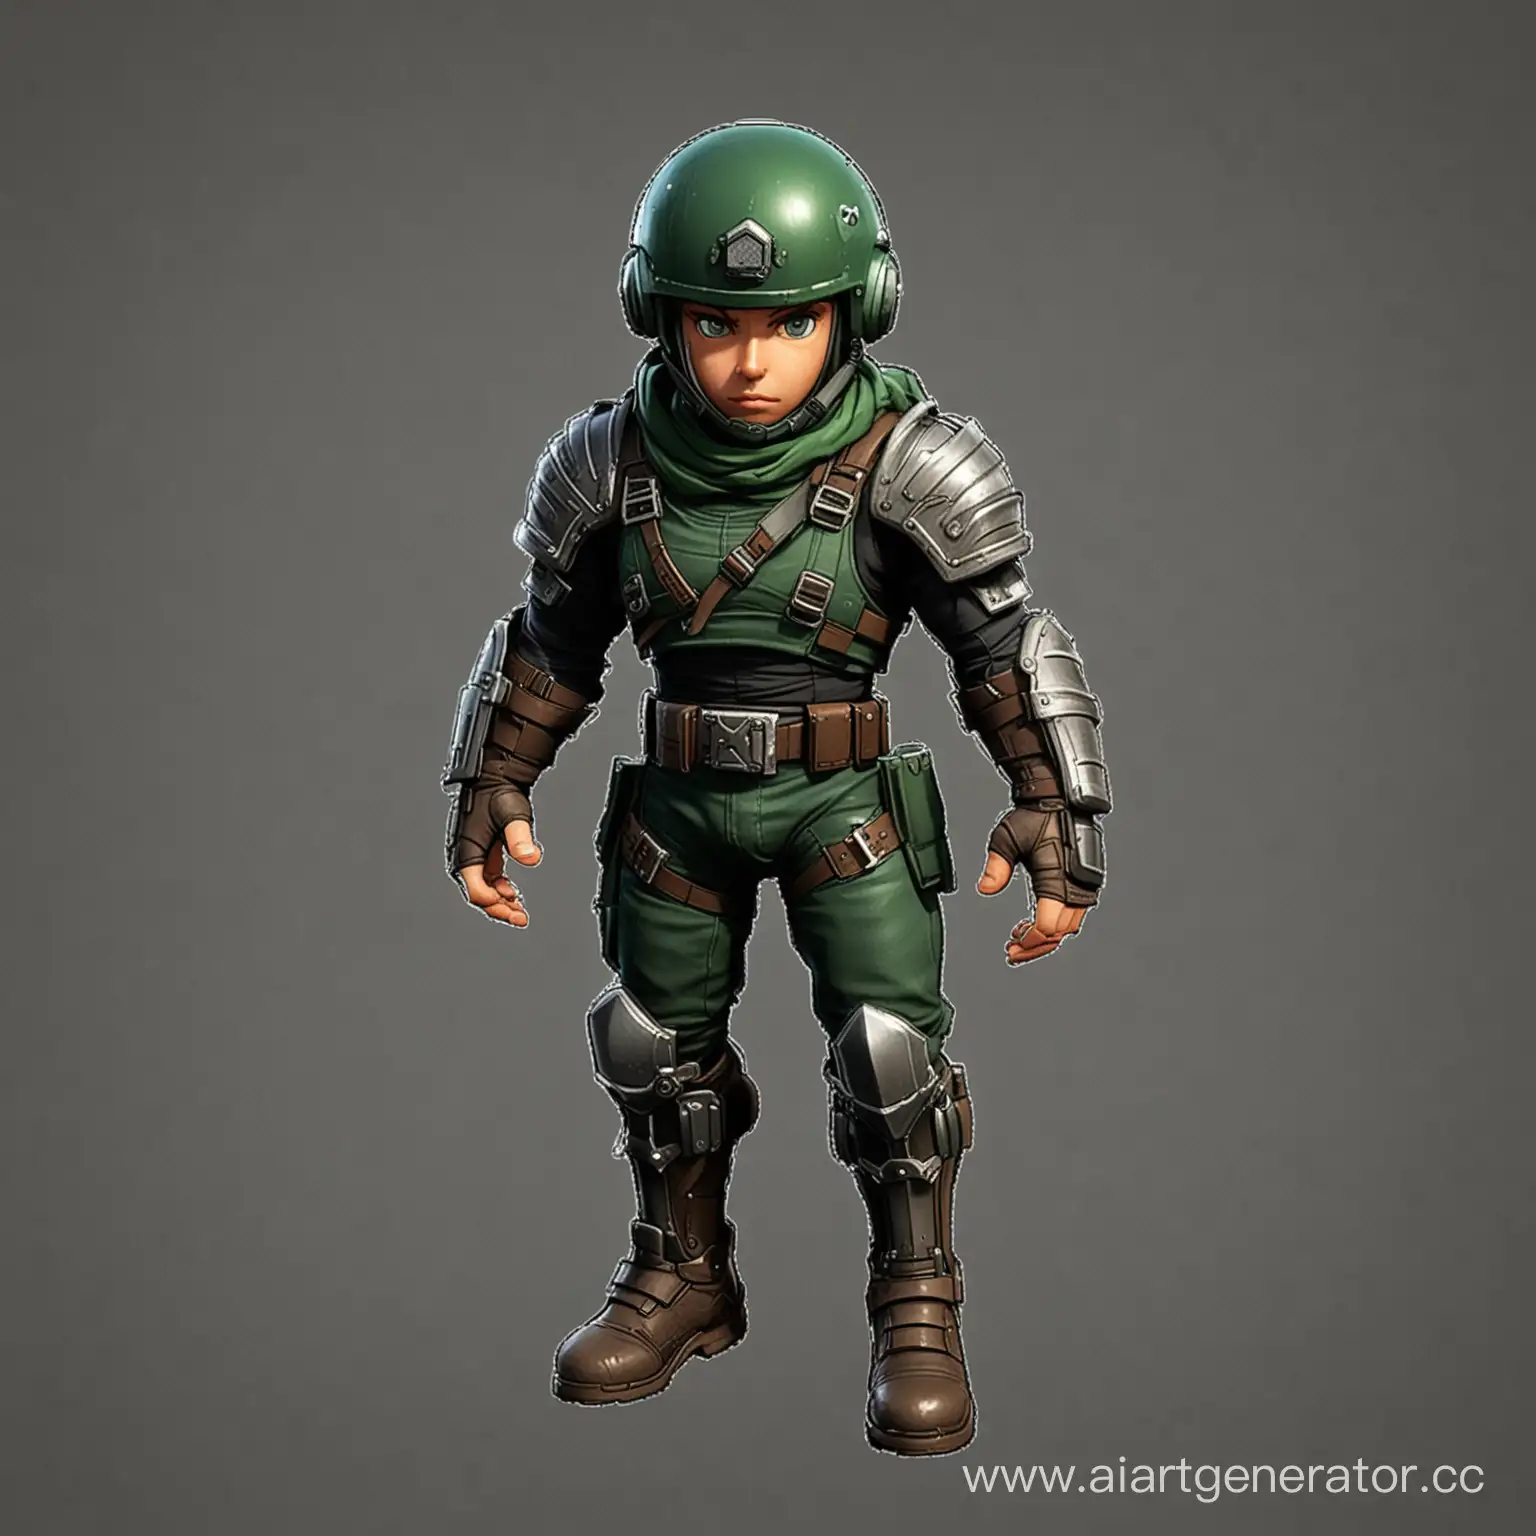 TopDown-View-Sprite-for-Scratch-Soldier-Tactical-Gaming-Character-Design